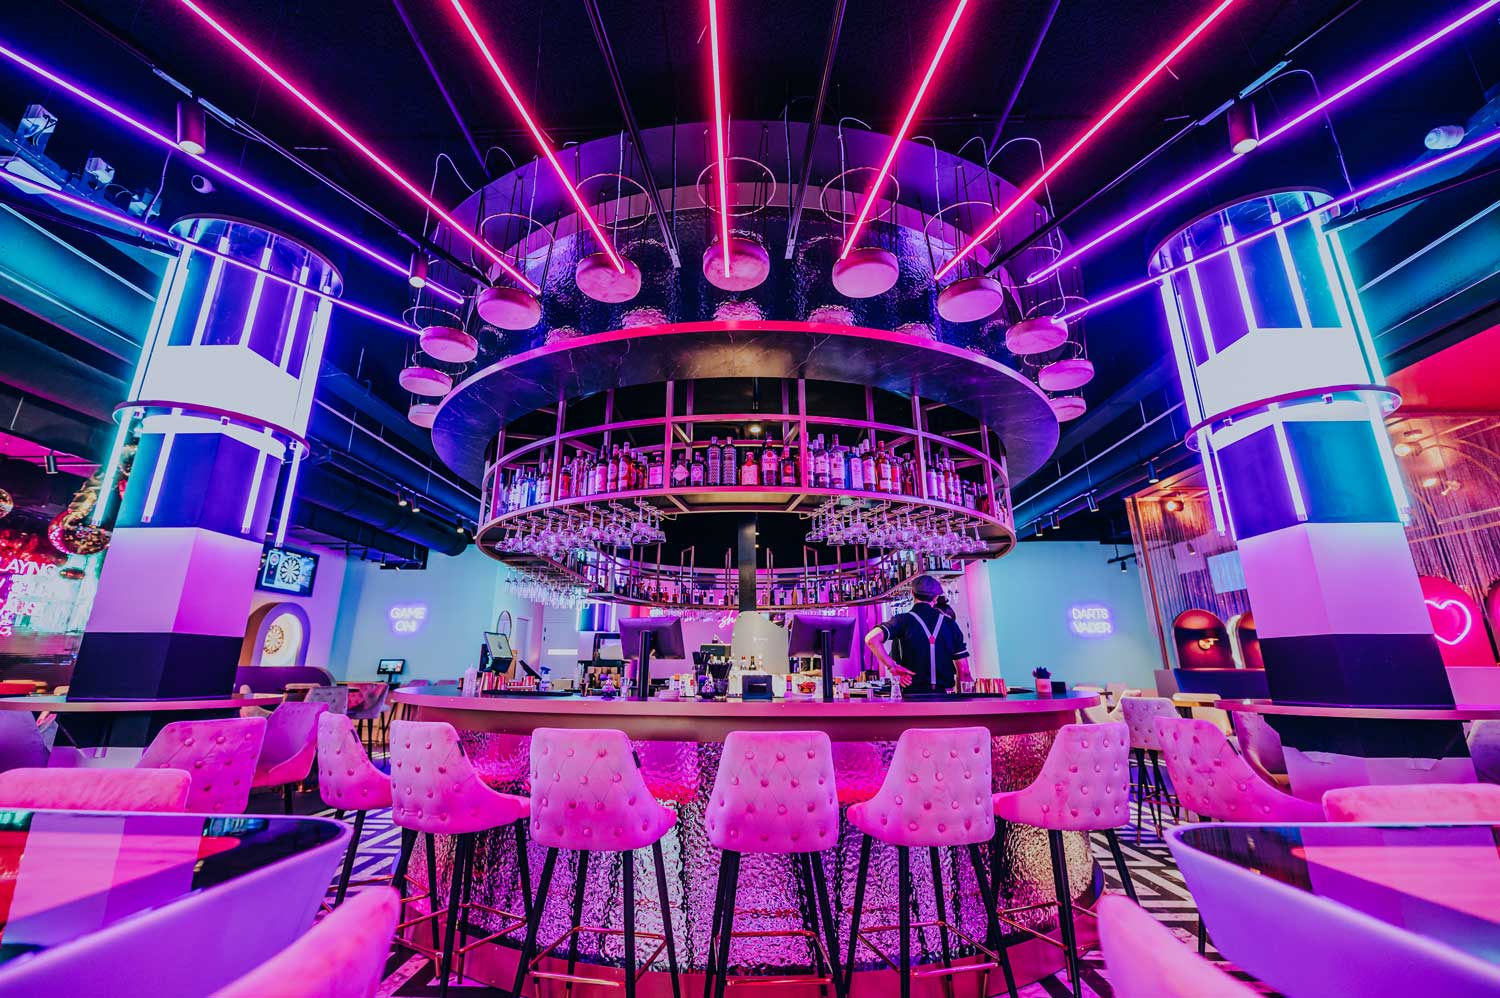 Colorful lights from Vivalyte illuminate The All Out Amsterdam’s bar area, offering an enthralling visual experience.